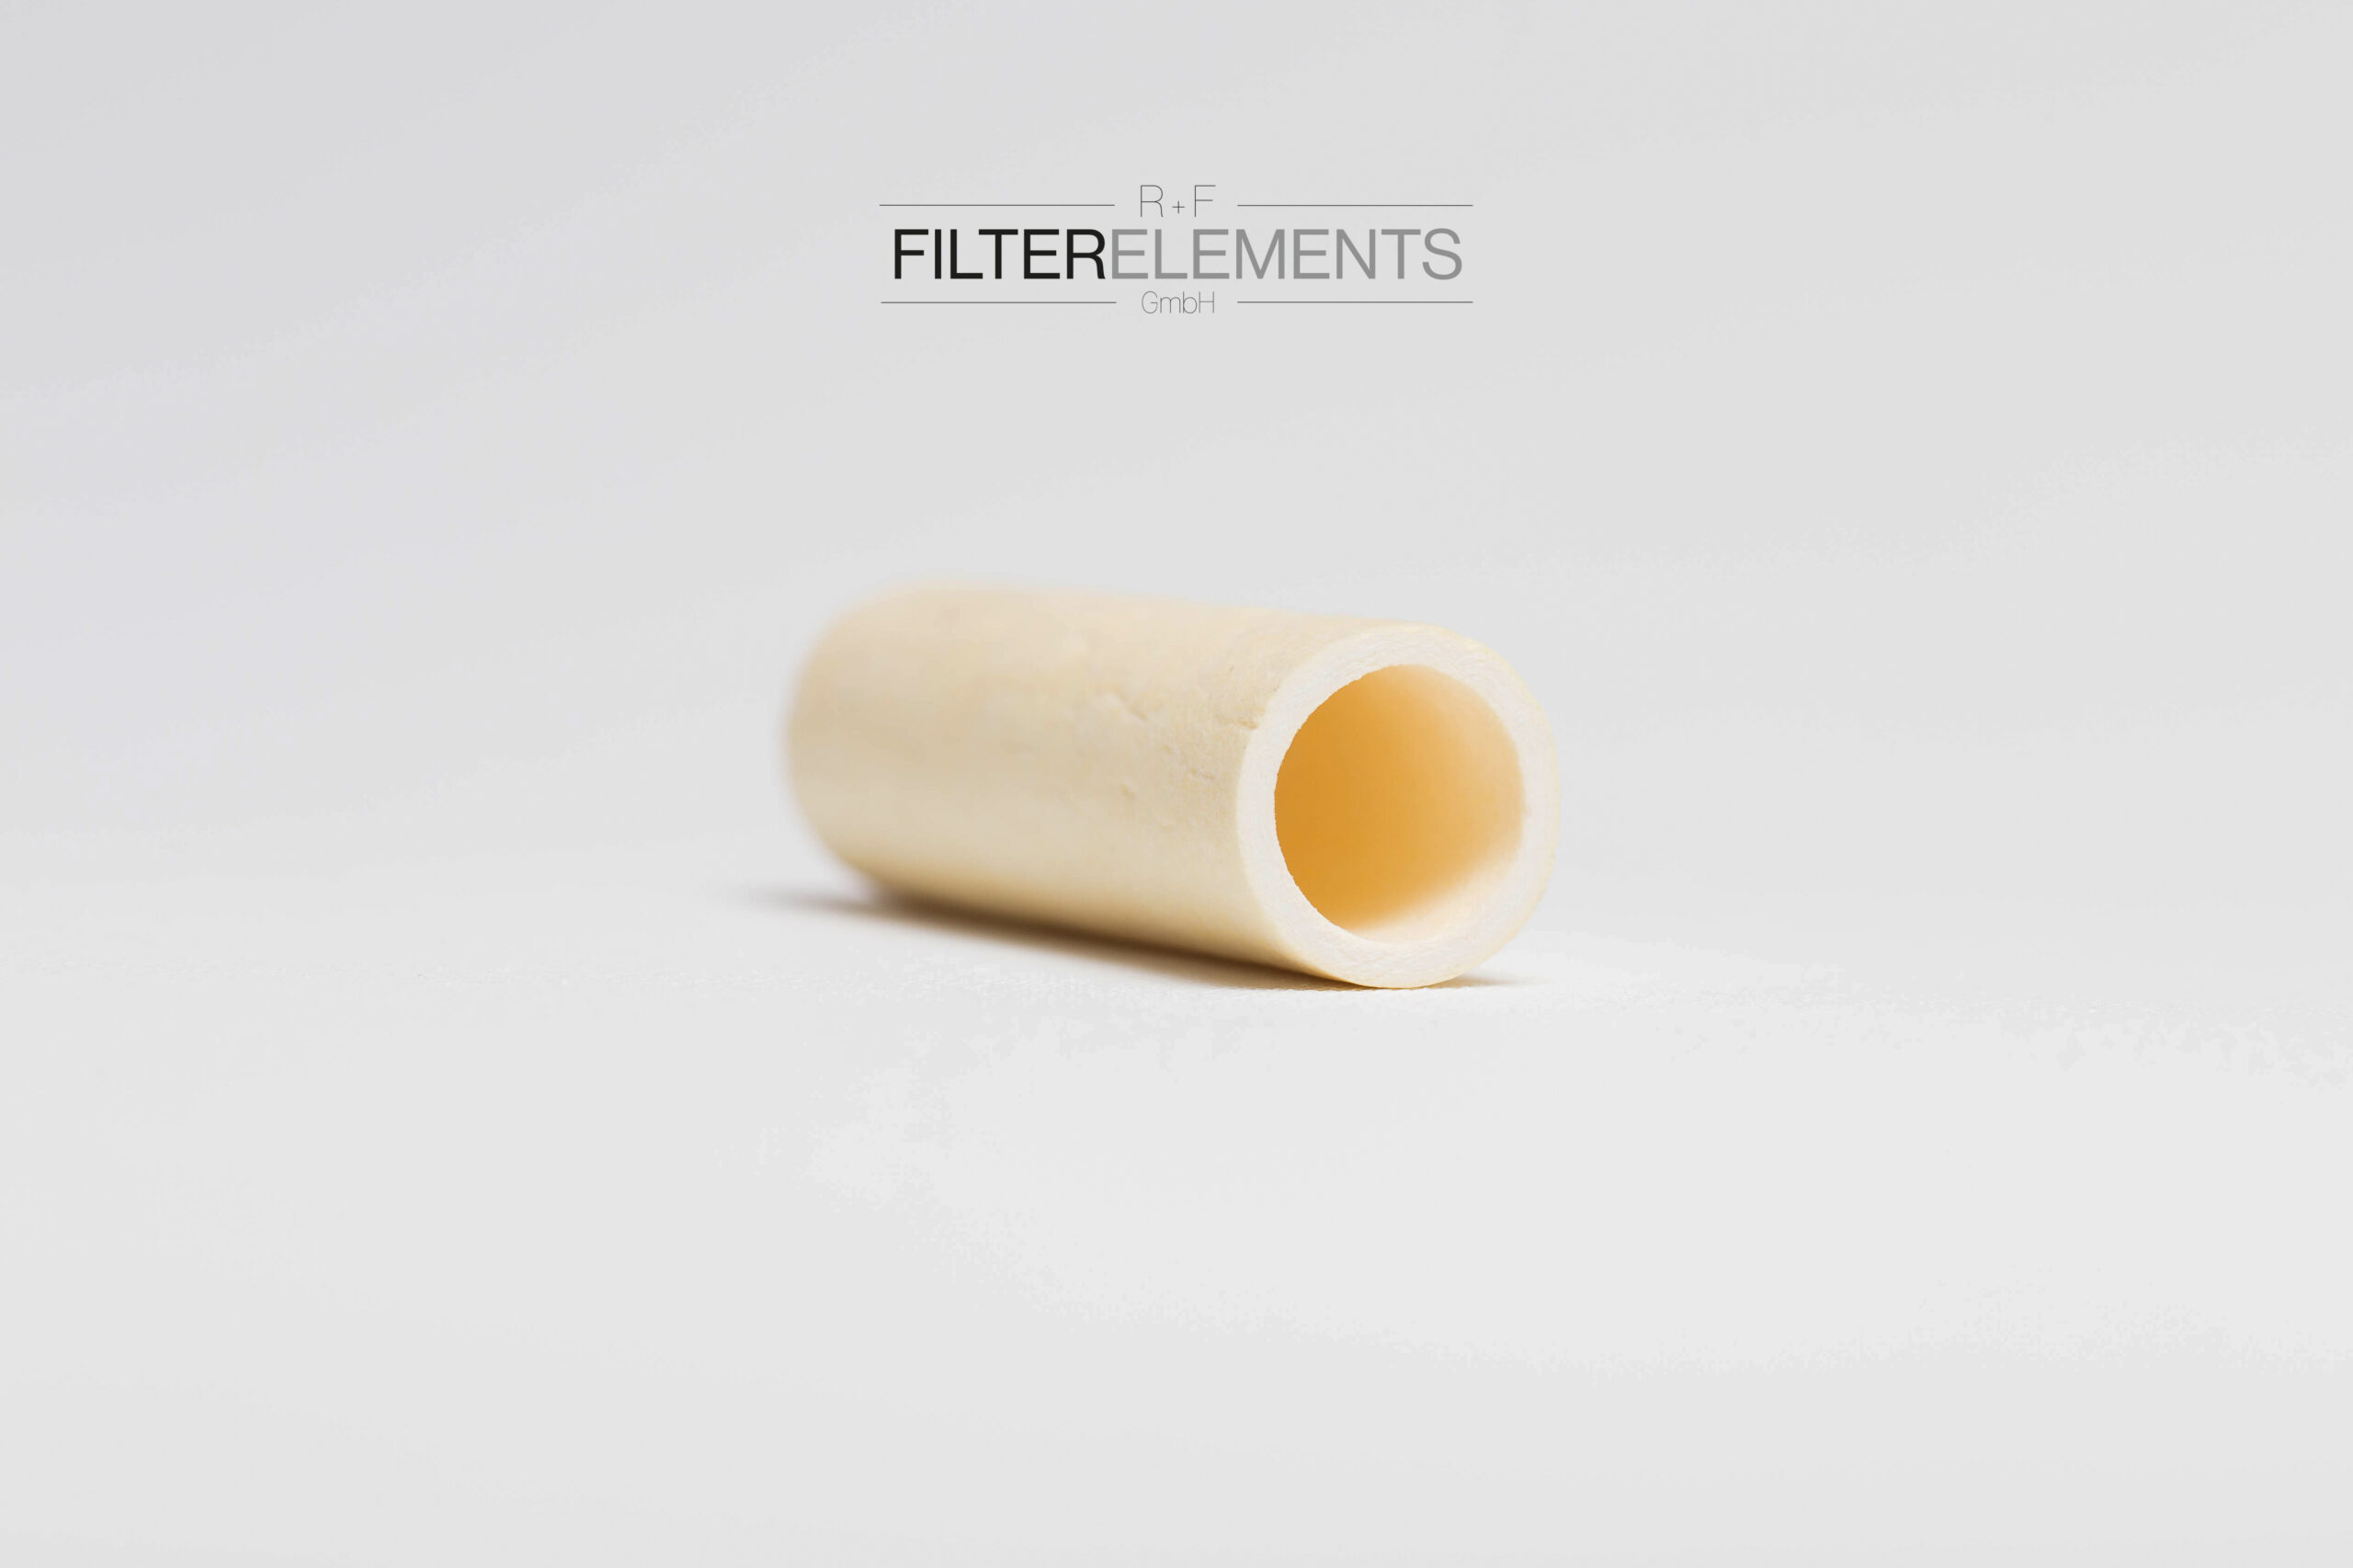 replacment-alternative-for-crossreference-particulate-filter-element-100-12-aq-100-12-bq-100-12-cq-100-12-dq-100-12-ah-100-12-bh-100-12-ch-100-12-dh-10012aq-10012bq-10012cq-10012dq-10012ah-10012bh-10012ch-10012dh